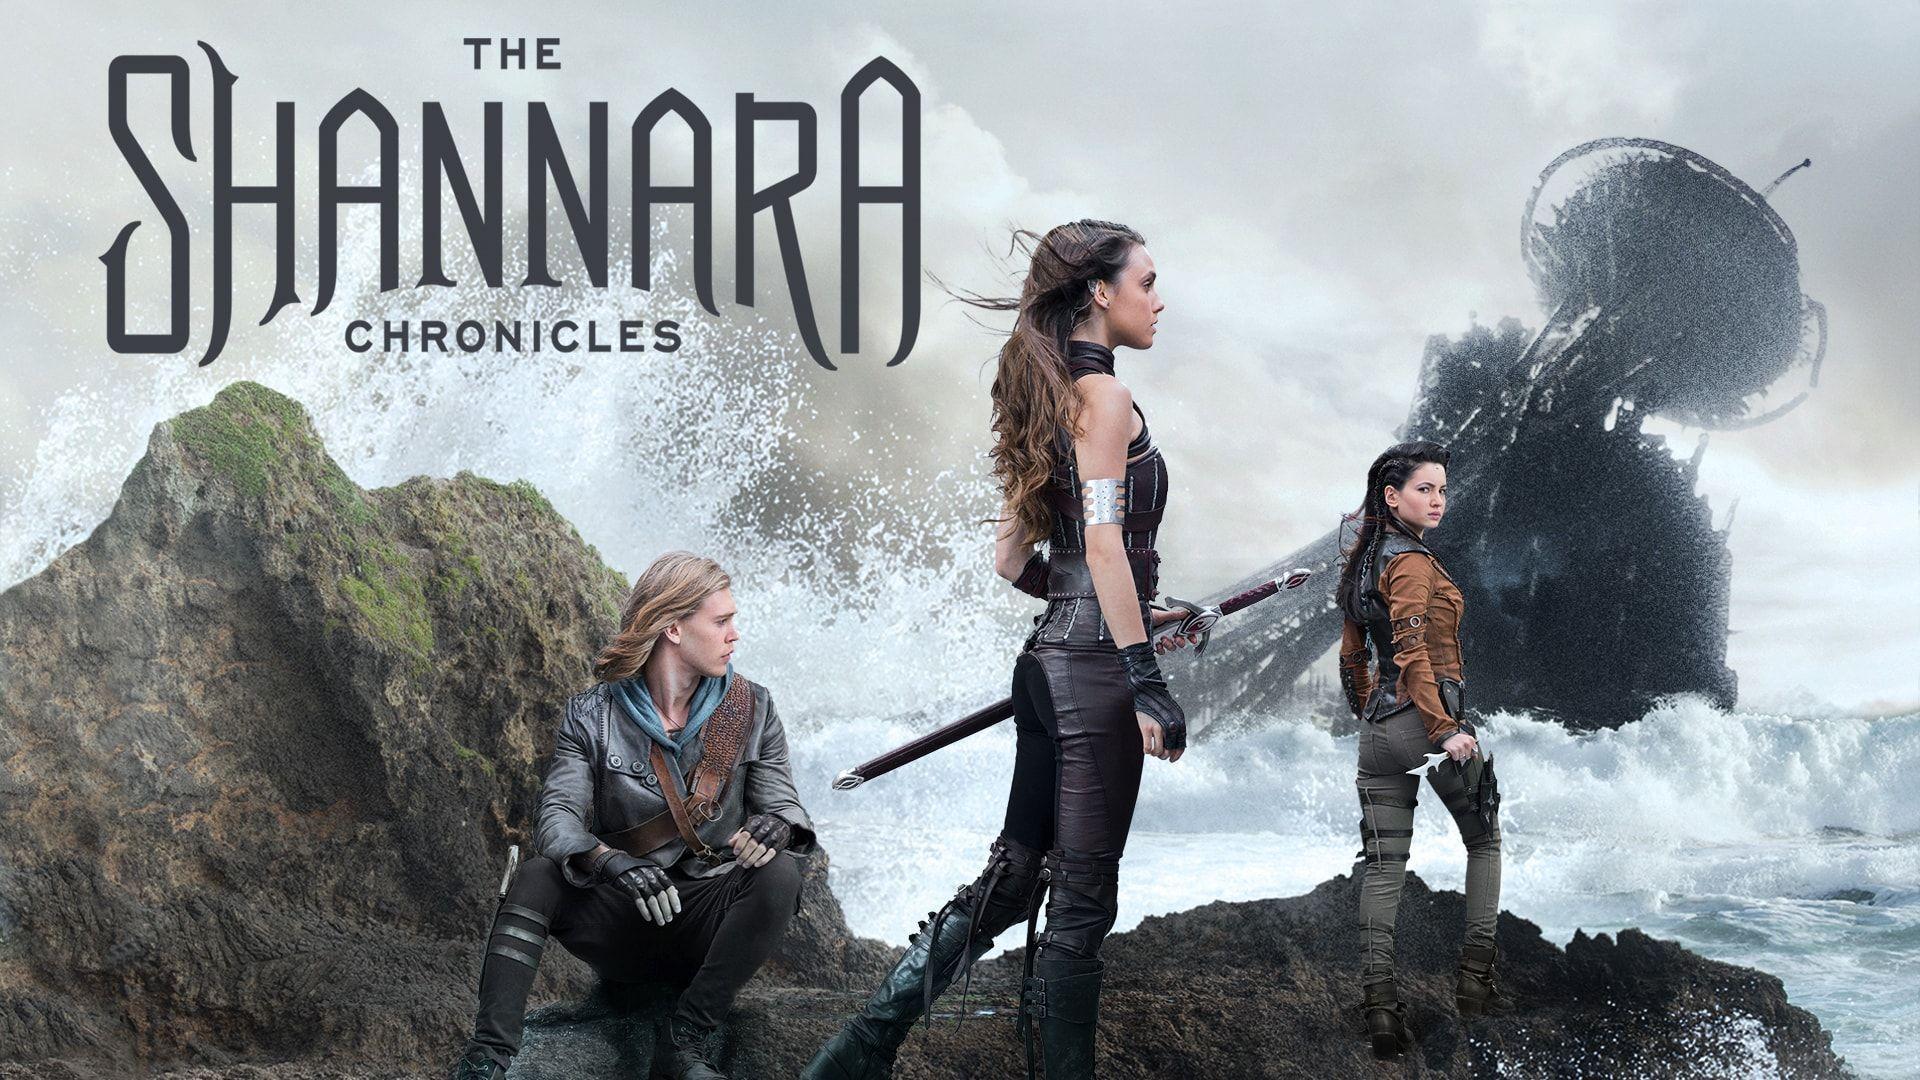 The Shannara Chronicles Wallpaper Image Photo Picture